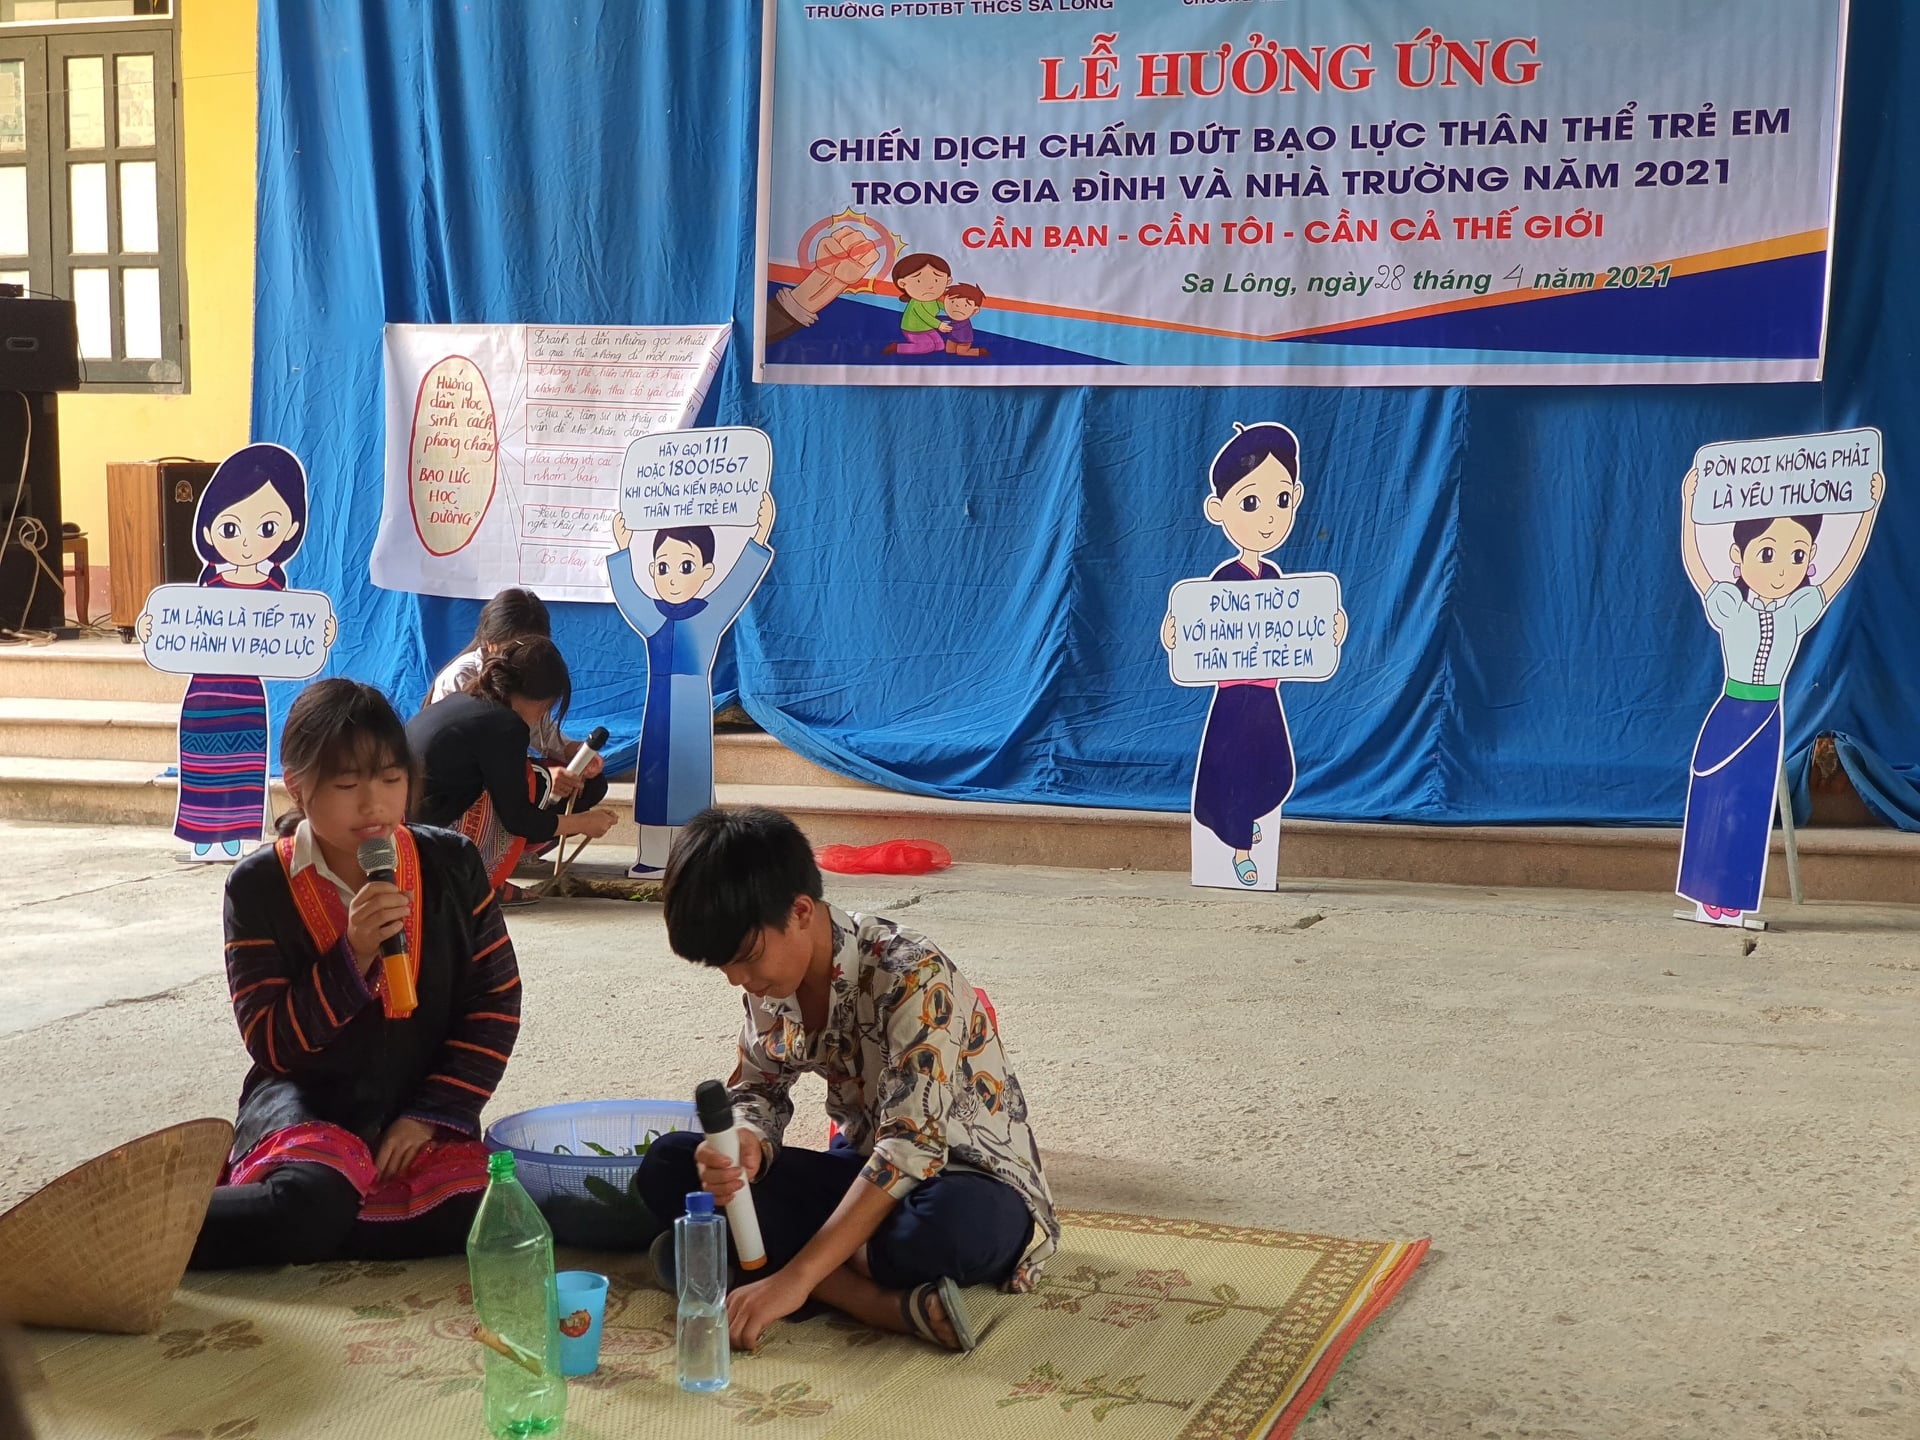 Rural district of Dien Bien province protecting children from violence